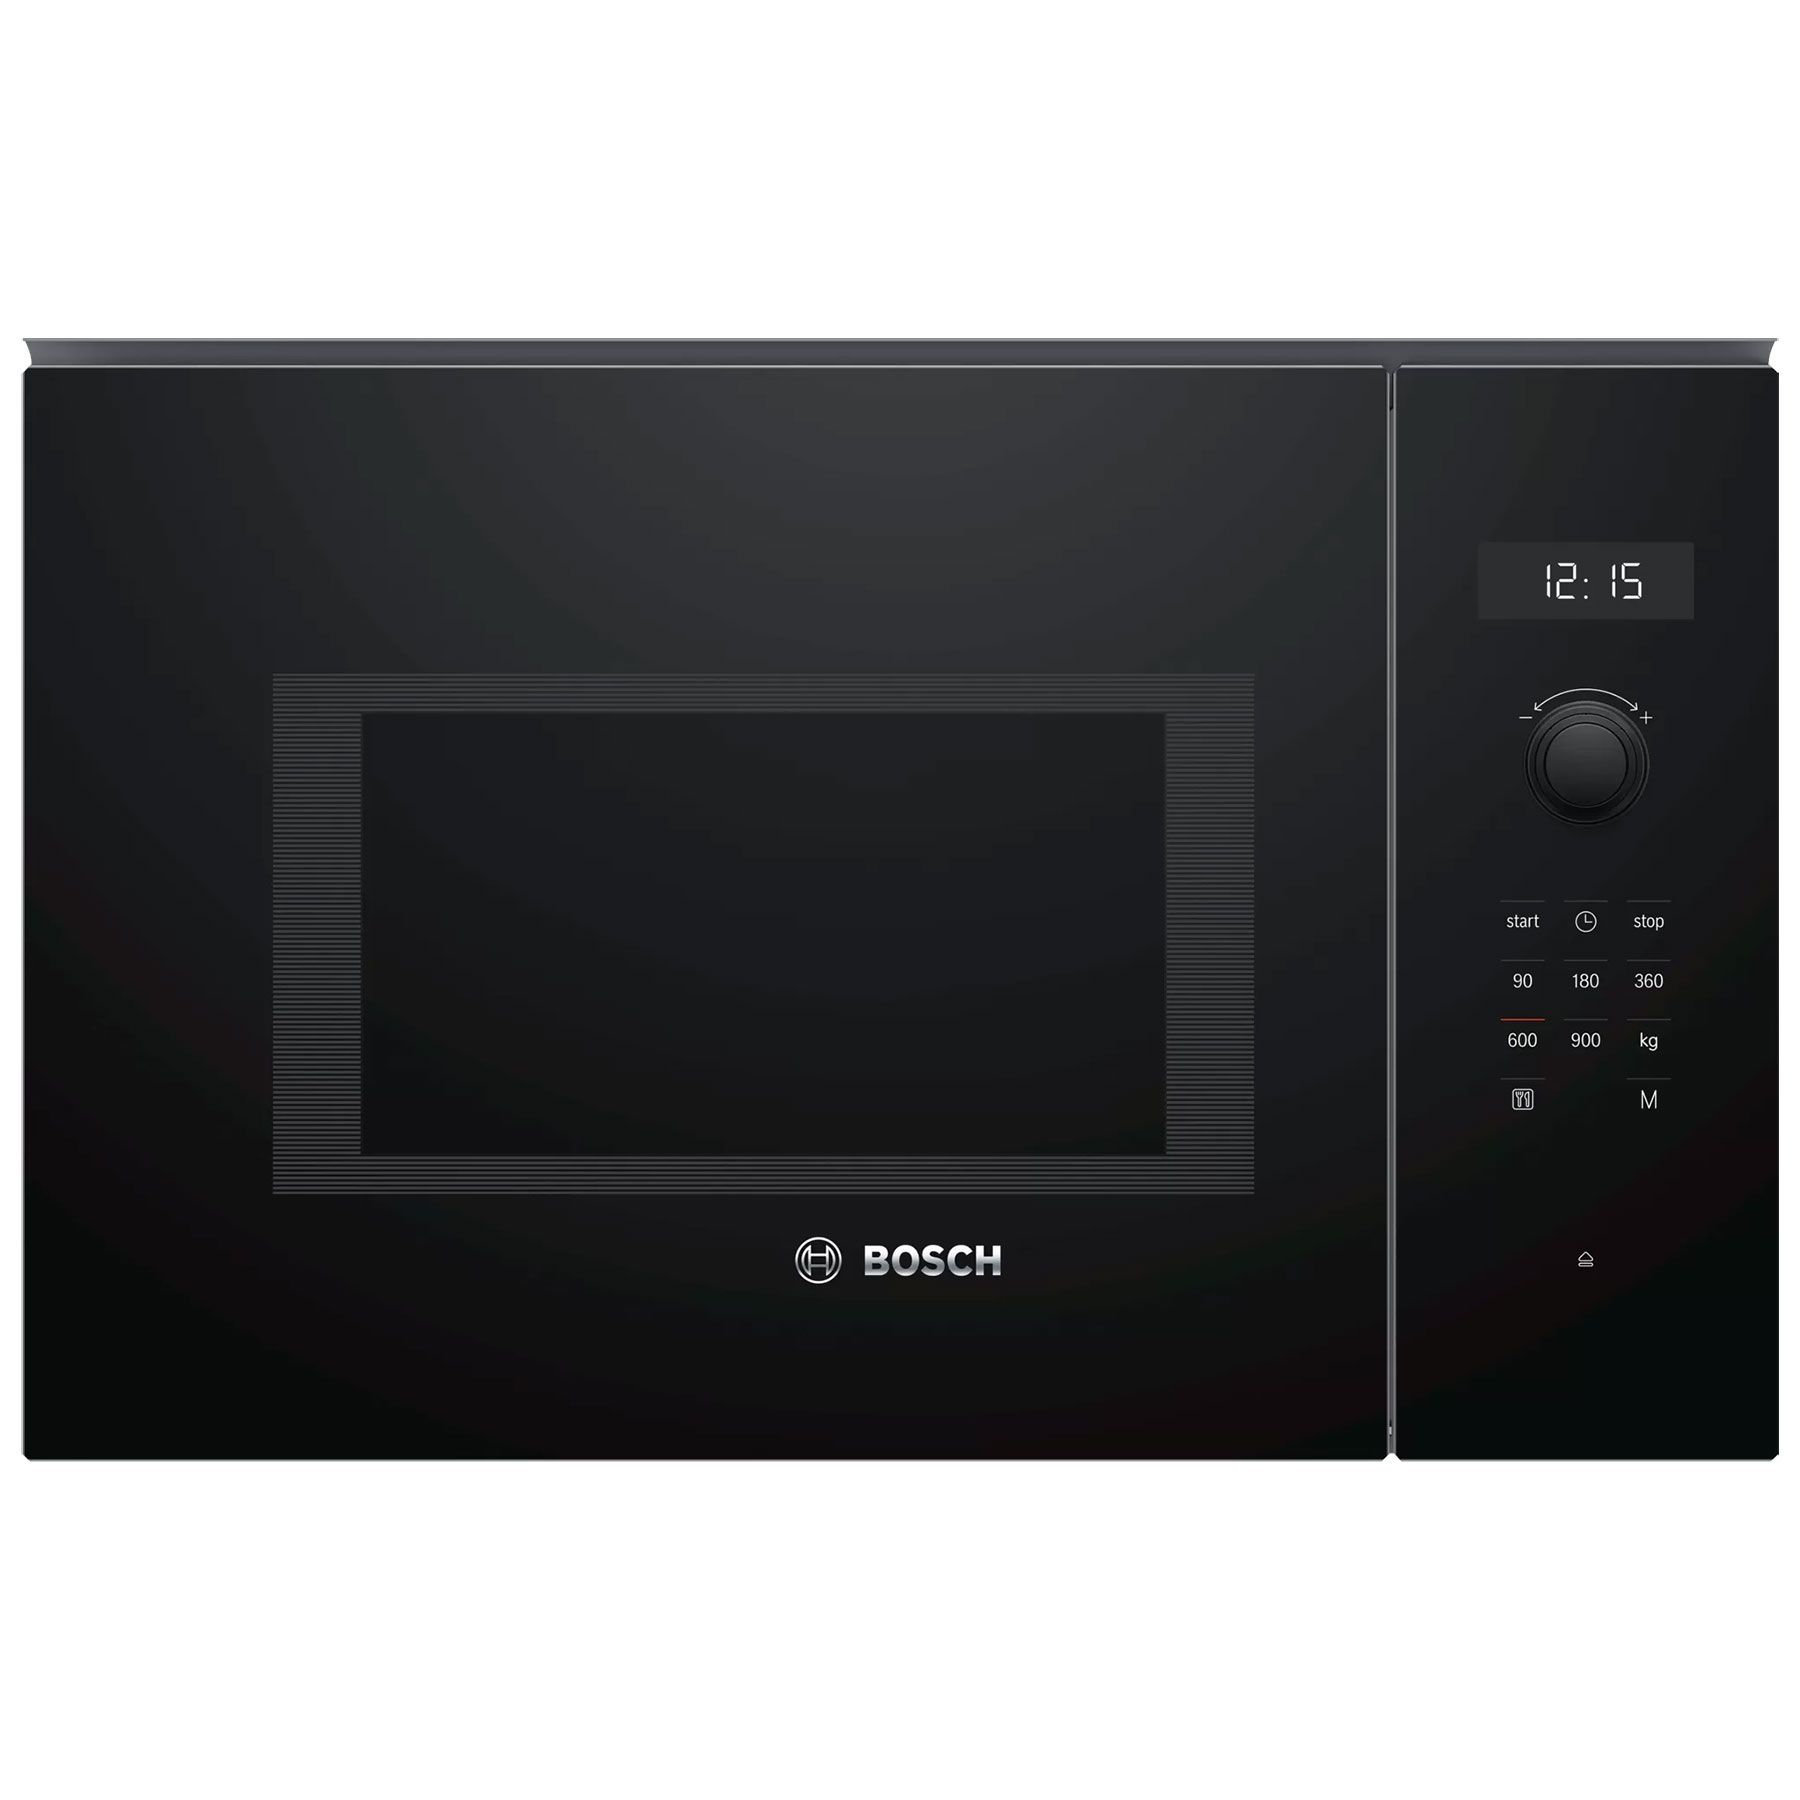 Bosch BFL554MB0B Series 6 Built in Microwave Oven in Black 900W 25 Lit